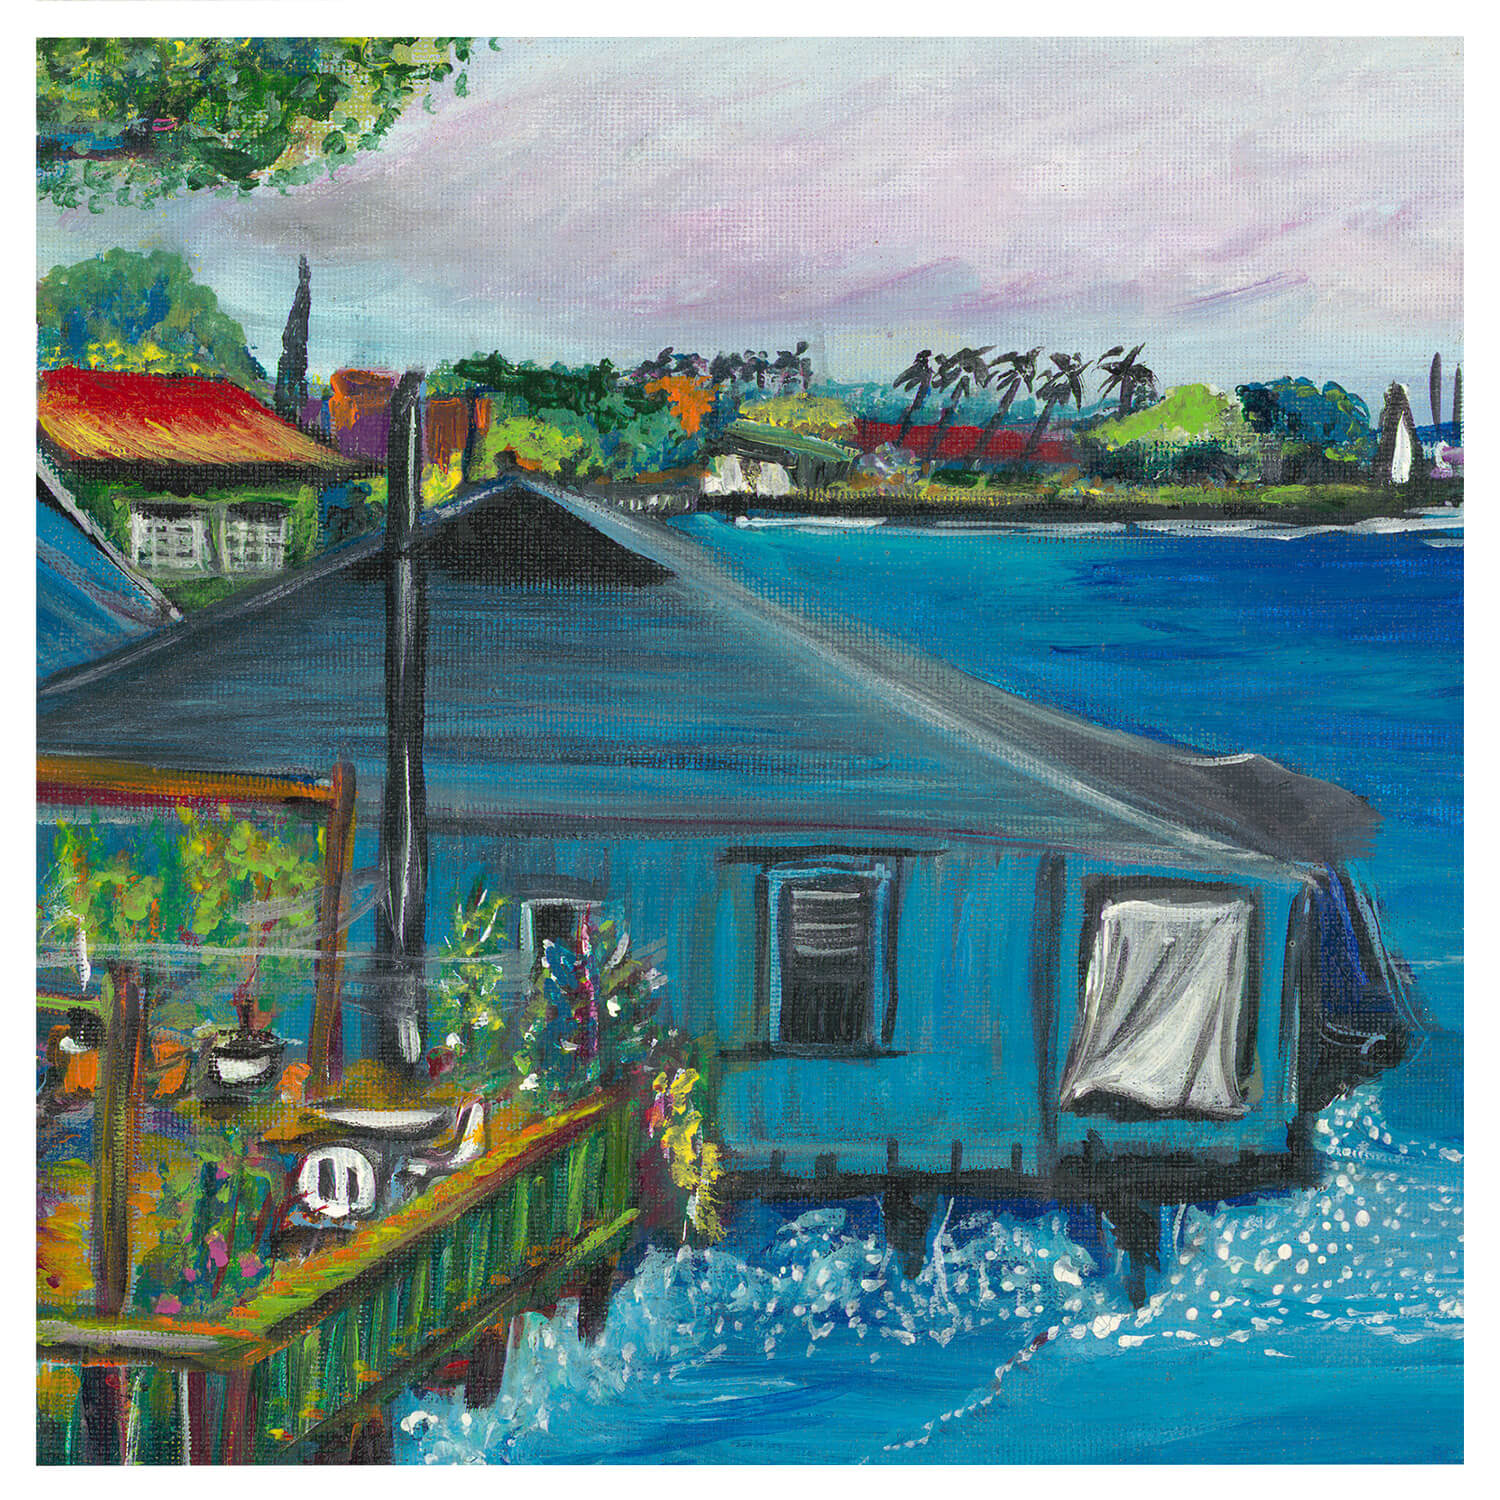 An illustration of a blue house    by  hawaii artist Suzanne MacAdam 